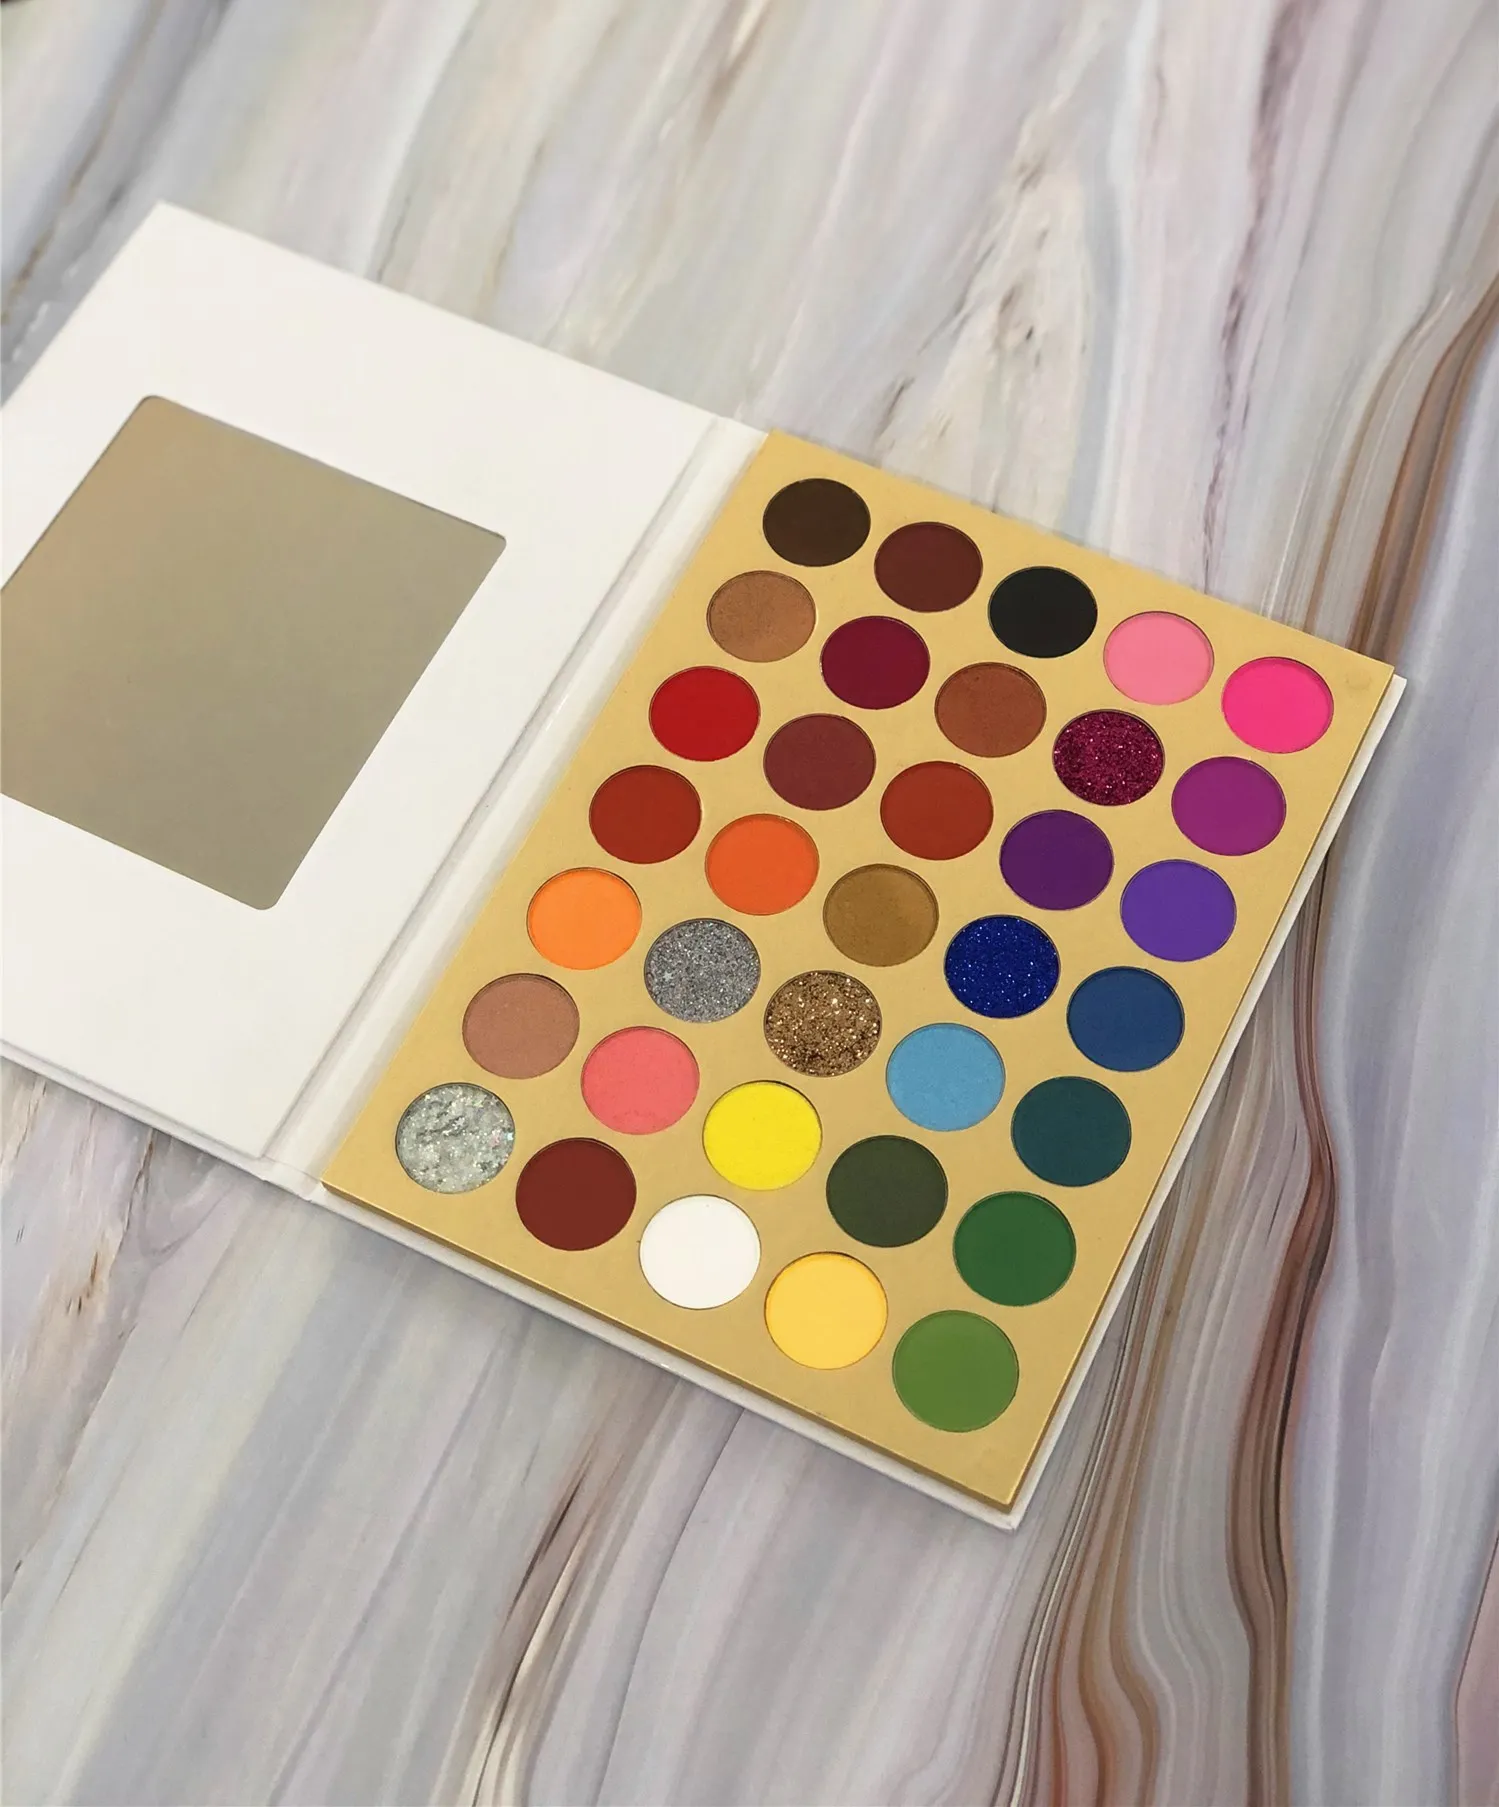 dose of colors eyeshadow palette